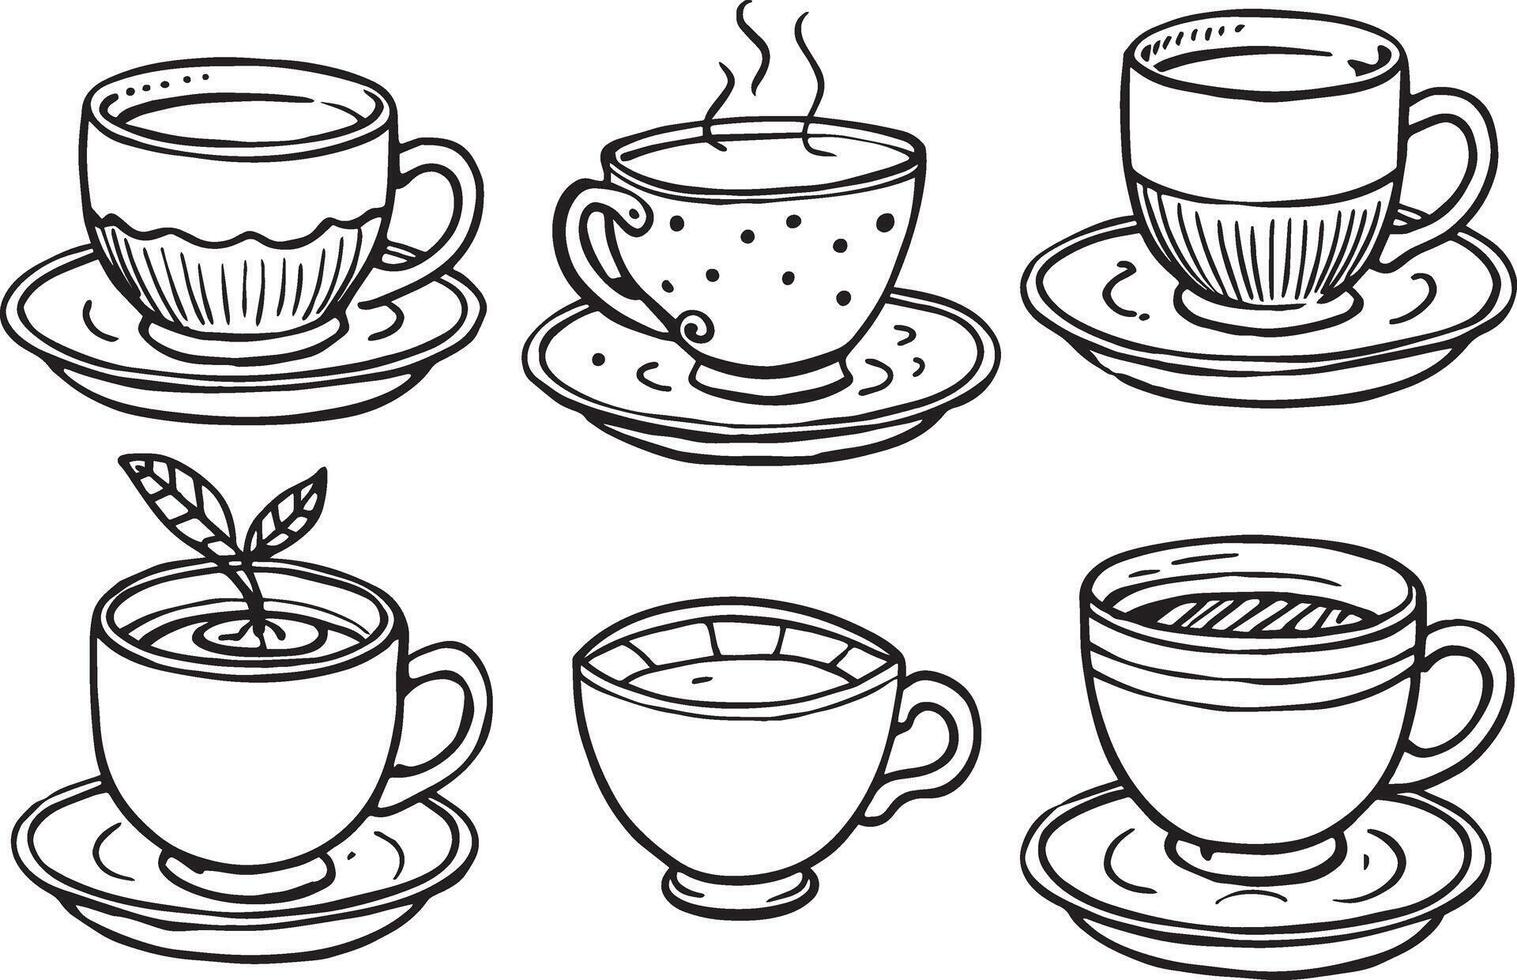 Coffee cup set. Black and white illustration for coloring book. vector